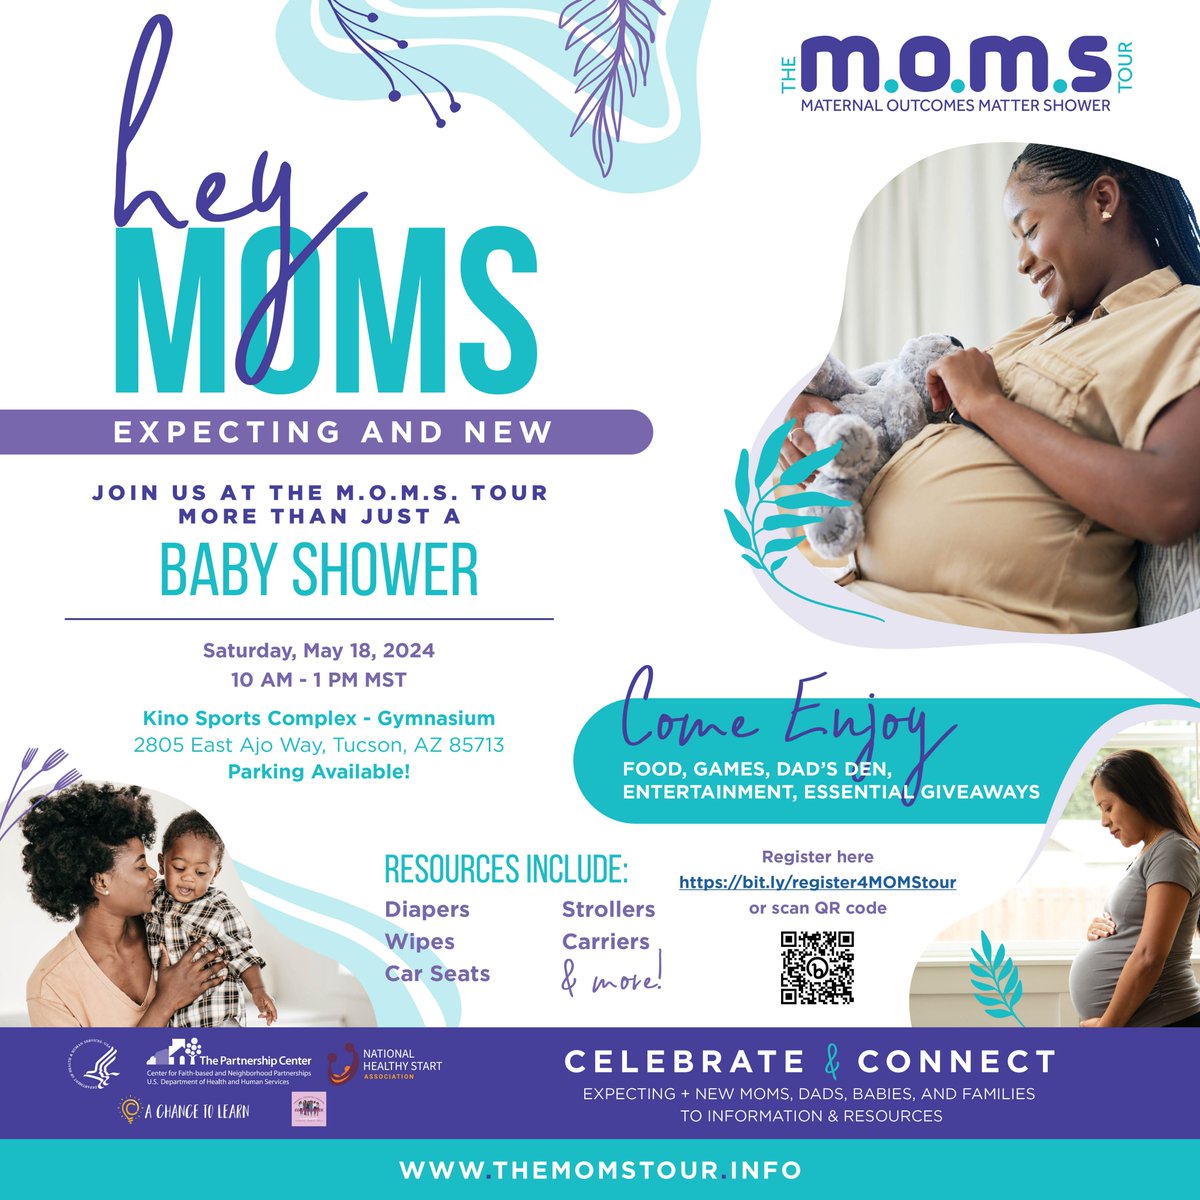 At the M.O.M.S. Tour, we bring together mental health professionals, birth workers, and community members to provide resources and support for pregnant & postpartum women and engage in meaningful discussions on maternal health disparities.
#maternalmentalhealth #NWHW